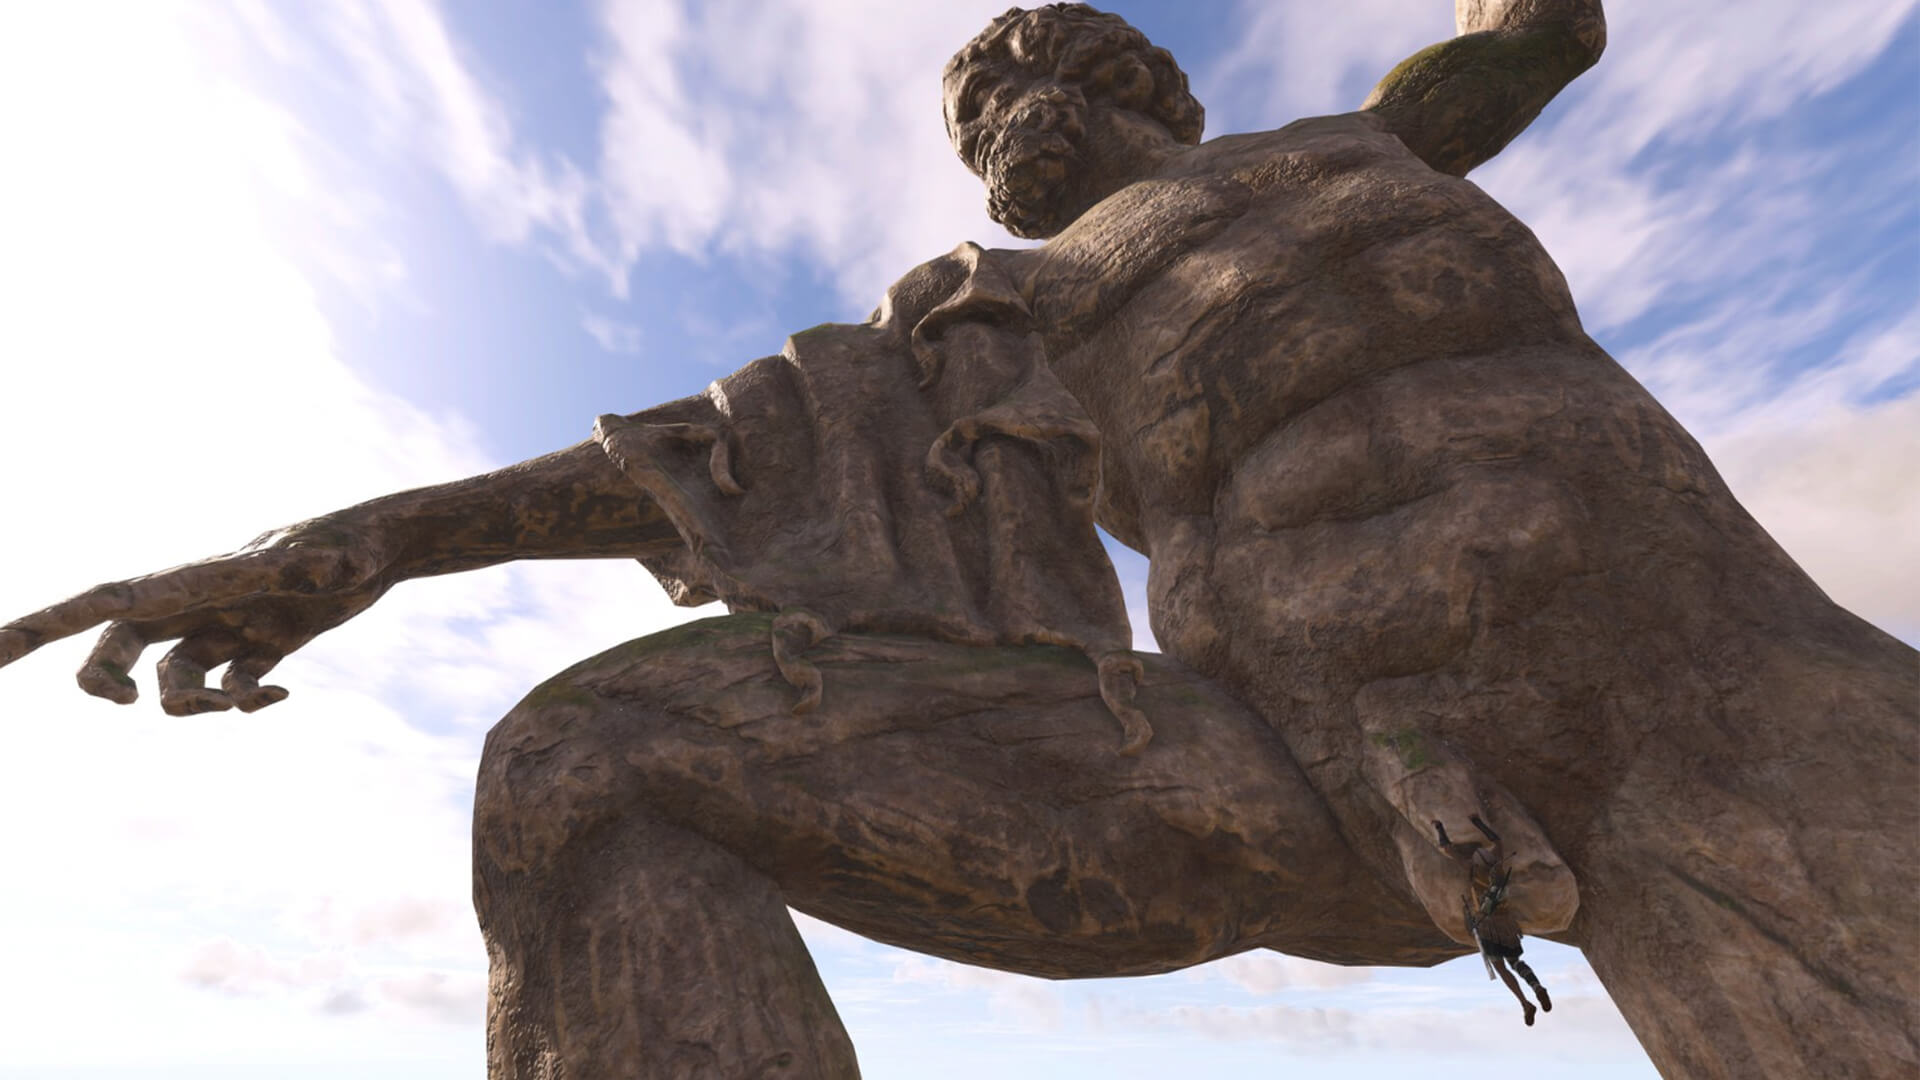 Climbing on the Lightning Zeus Statue in Assassins Creed 